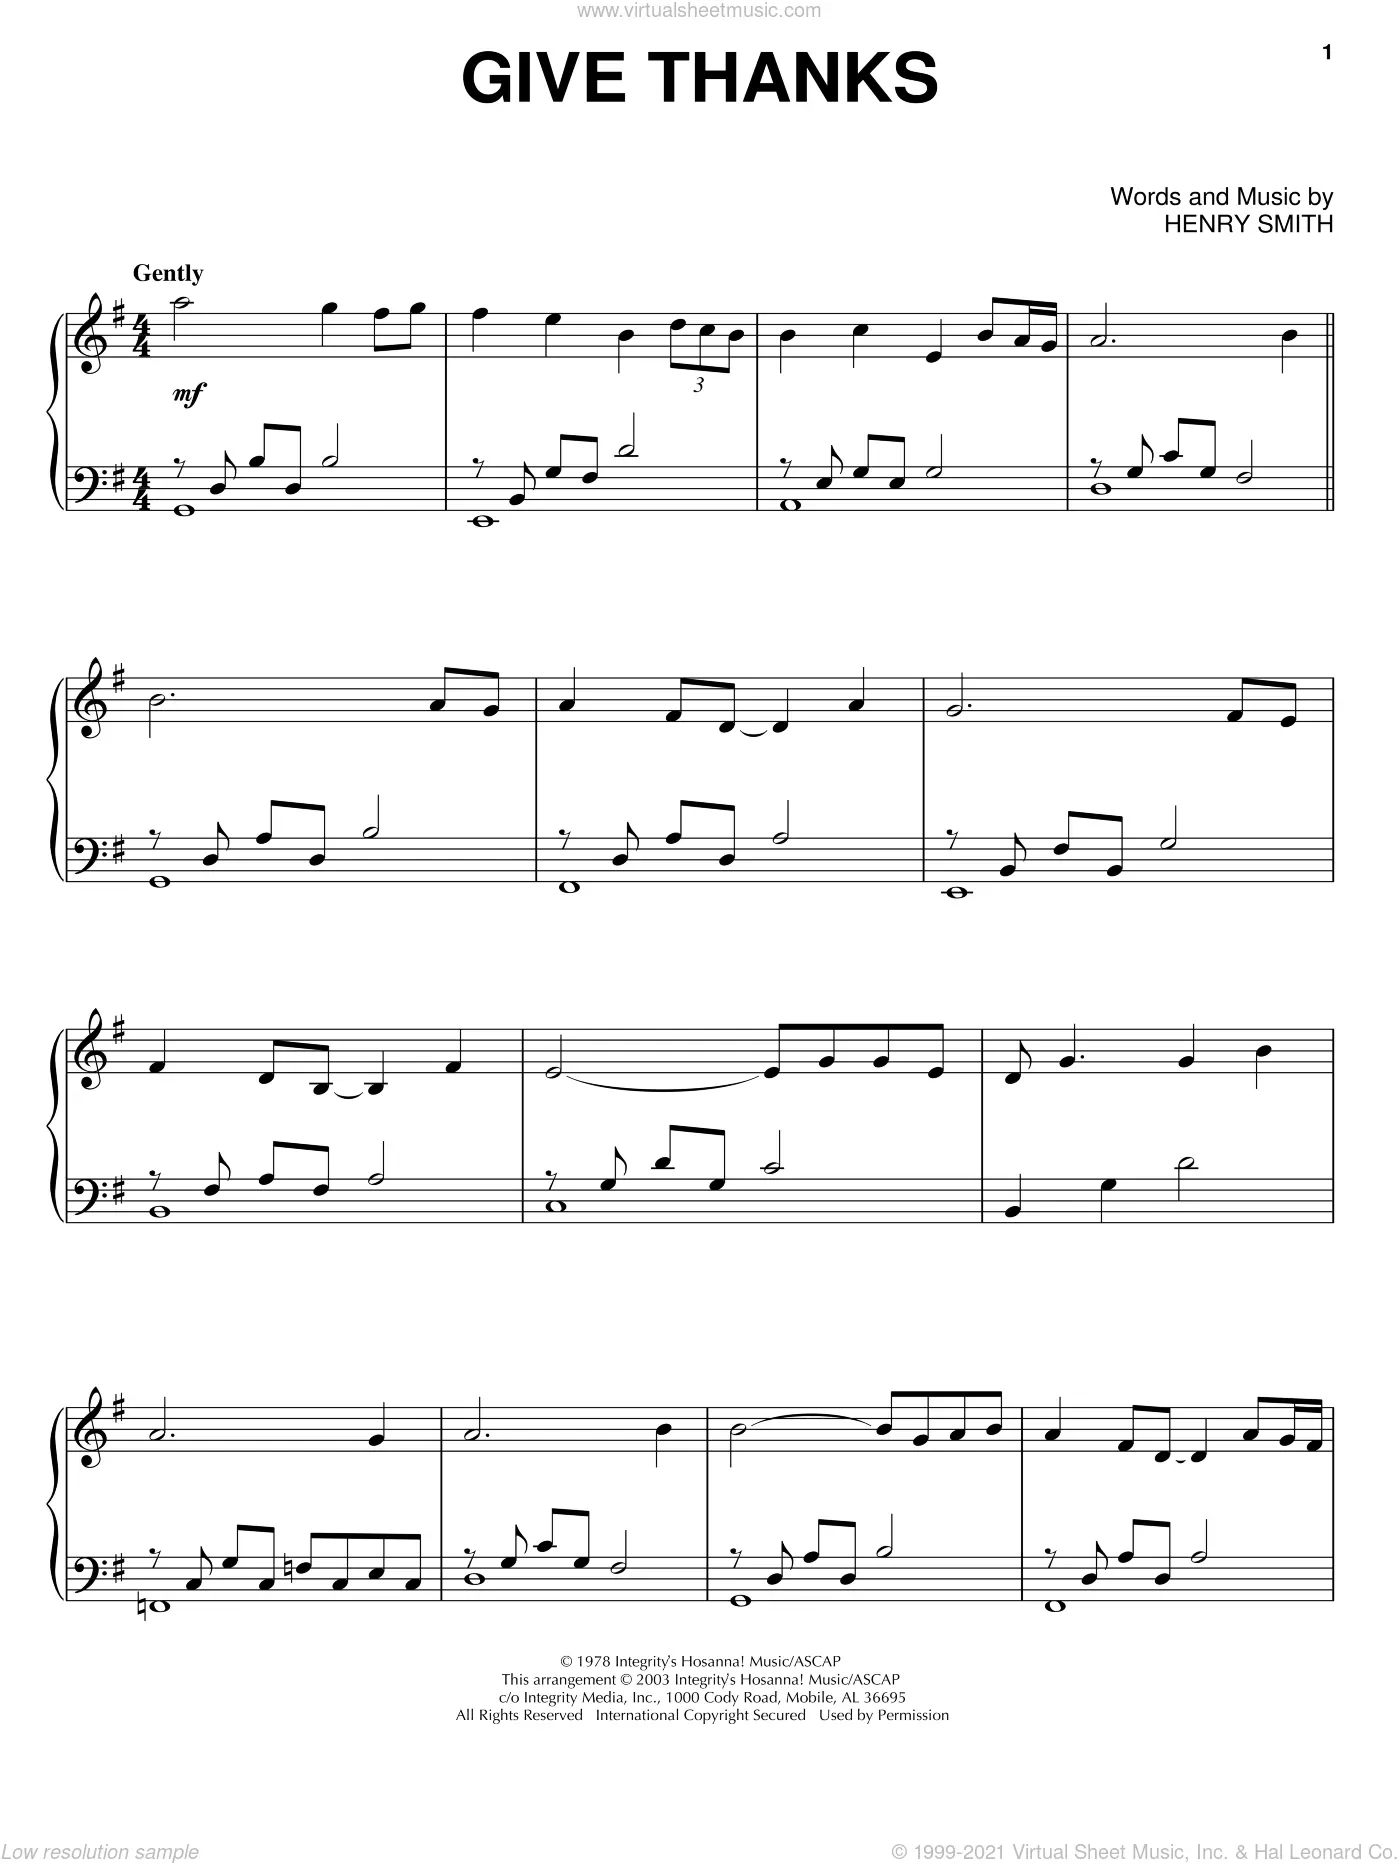 Deep Pocket Sheet music for Piano (Solo) Easy